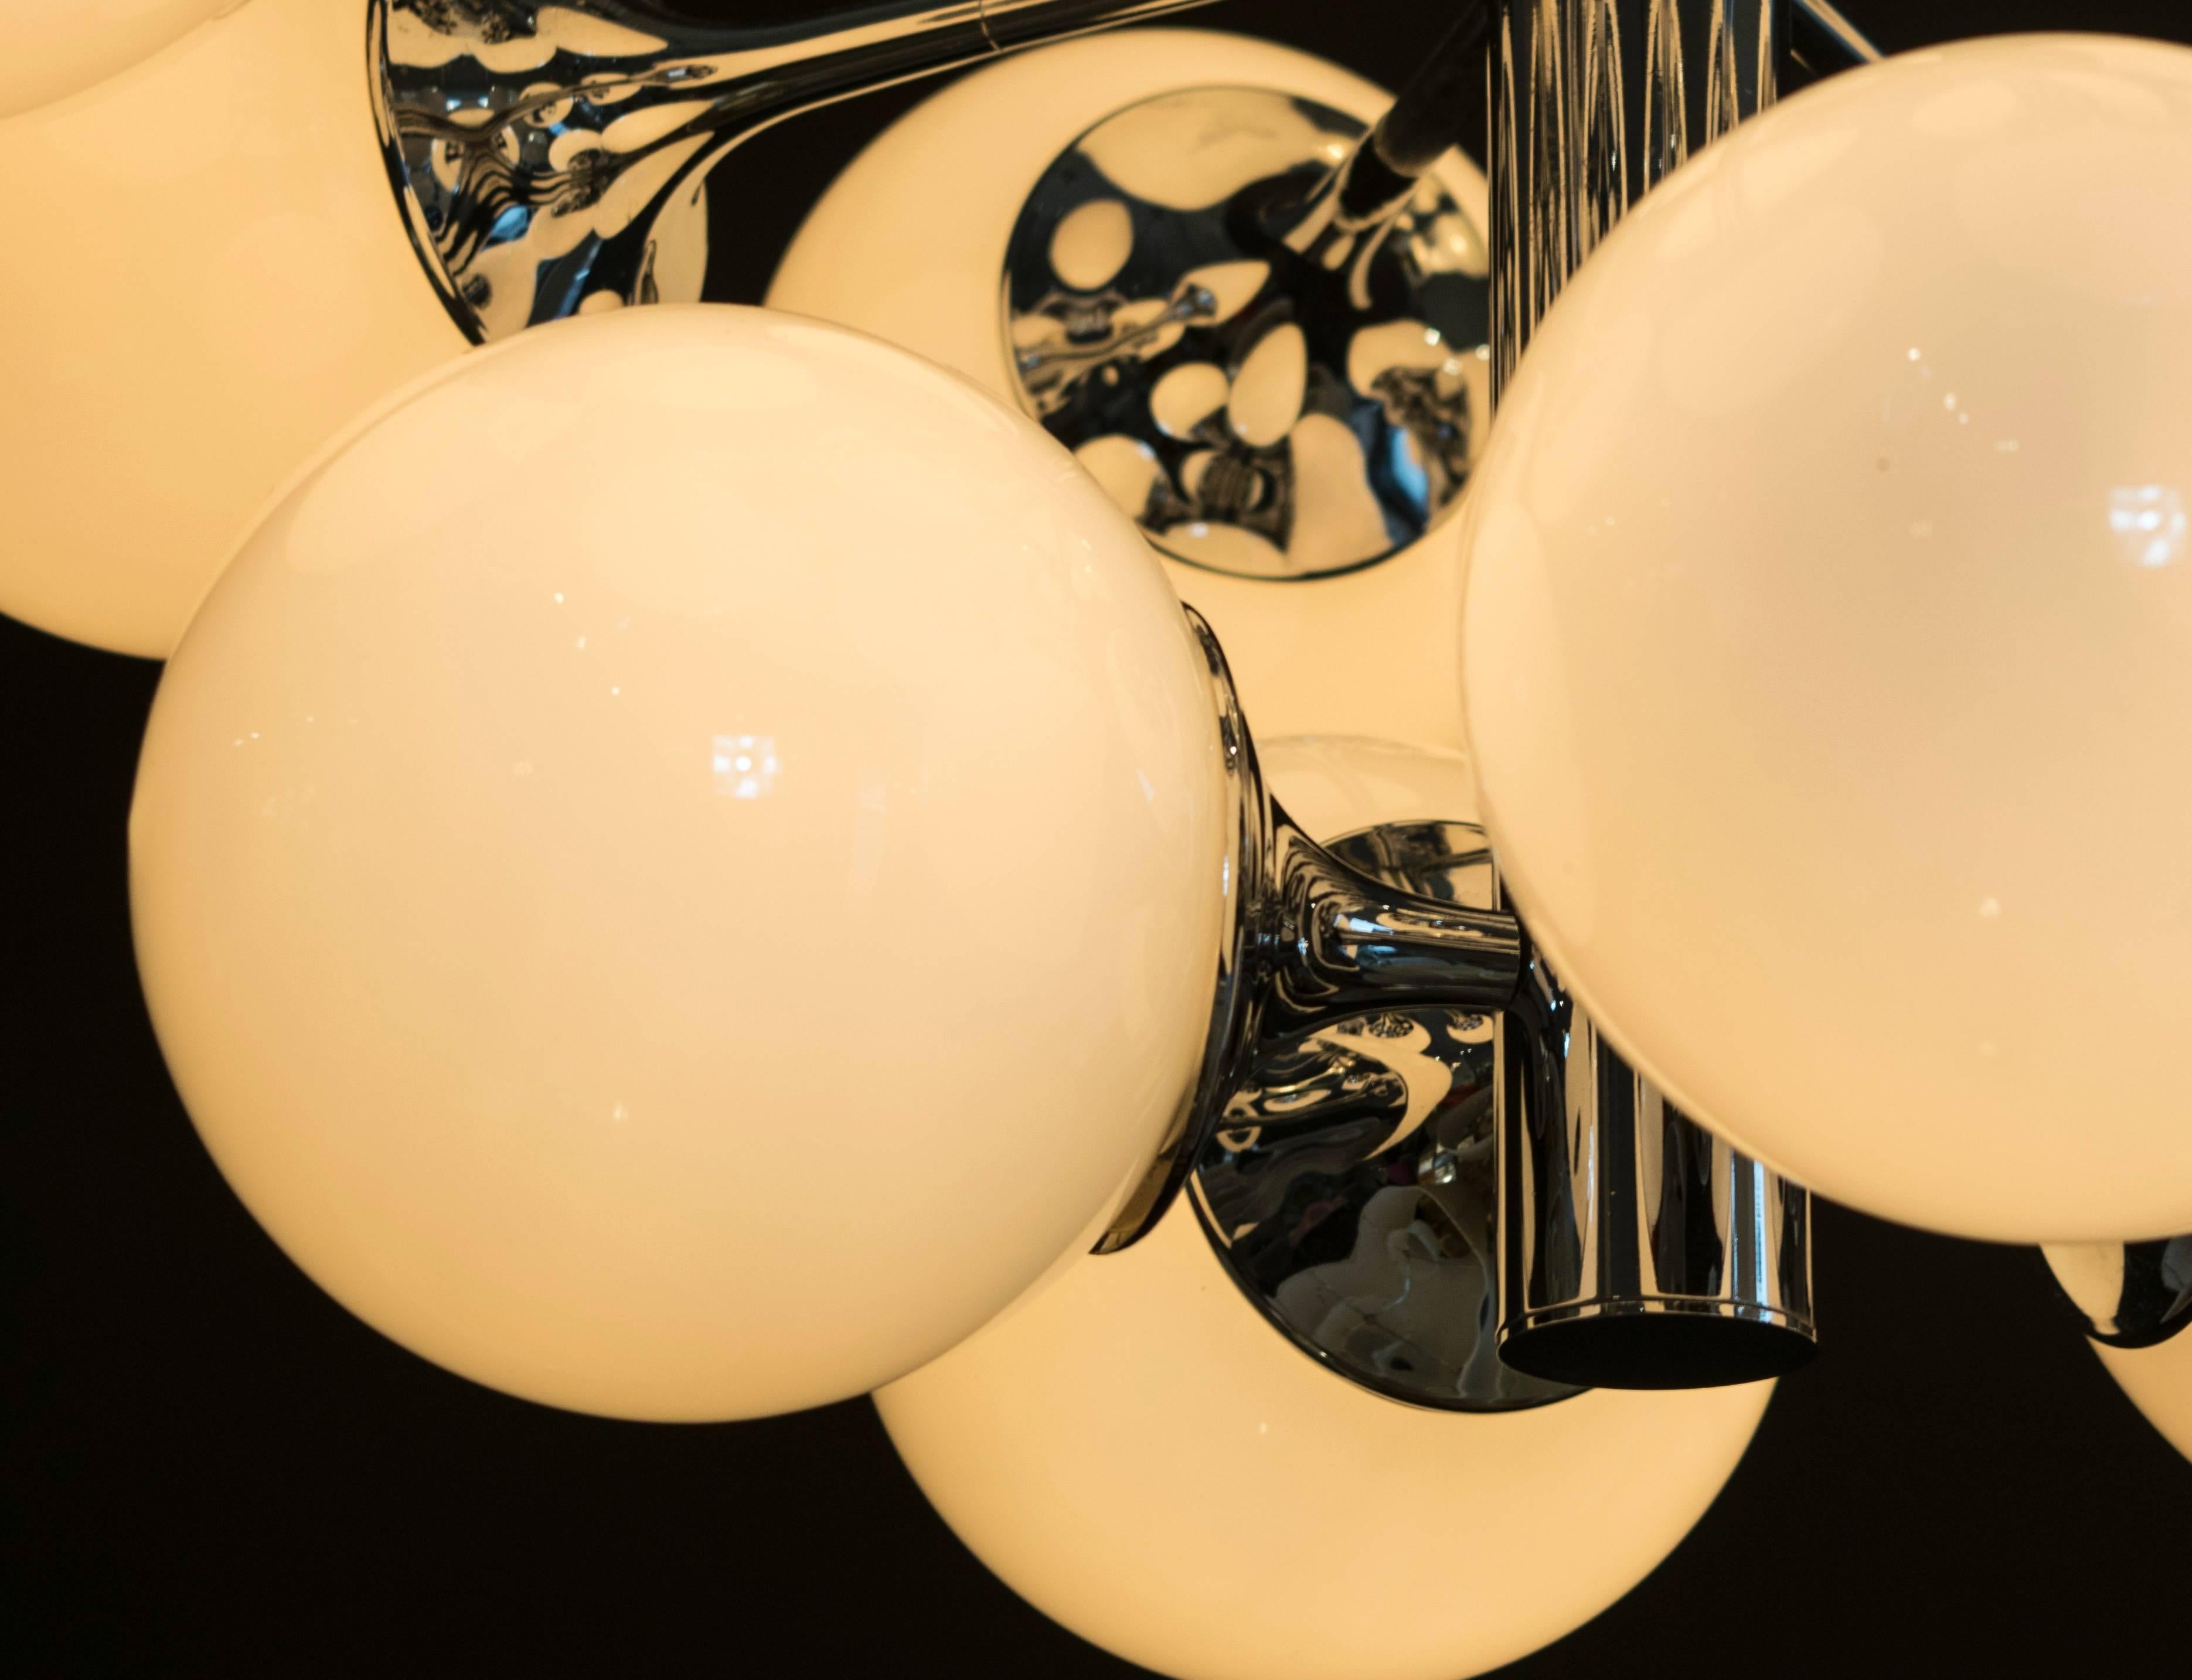 Extraordinary pair of Lightolier 16 globe Sputnik chandeliers with opaque white glass globes. It’s difficult to find pairs of these.